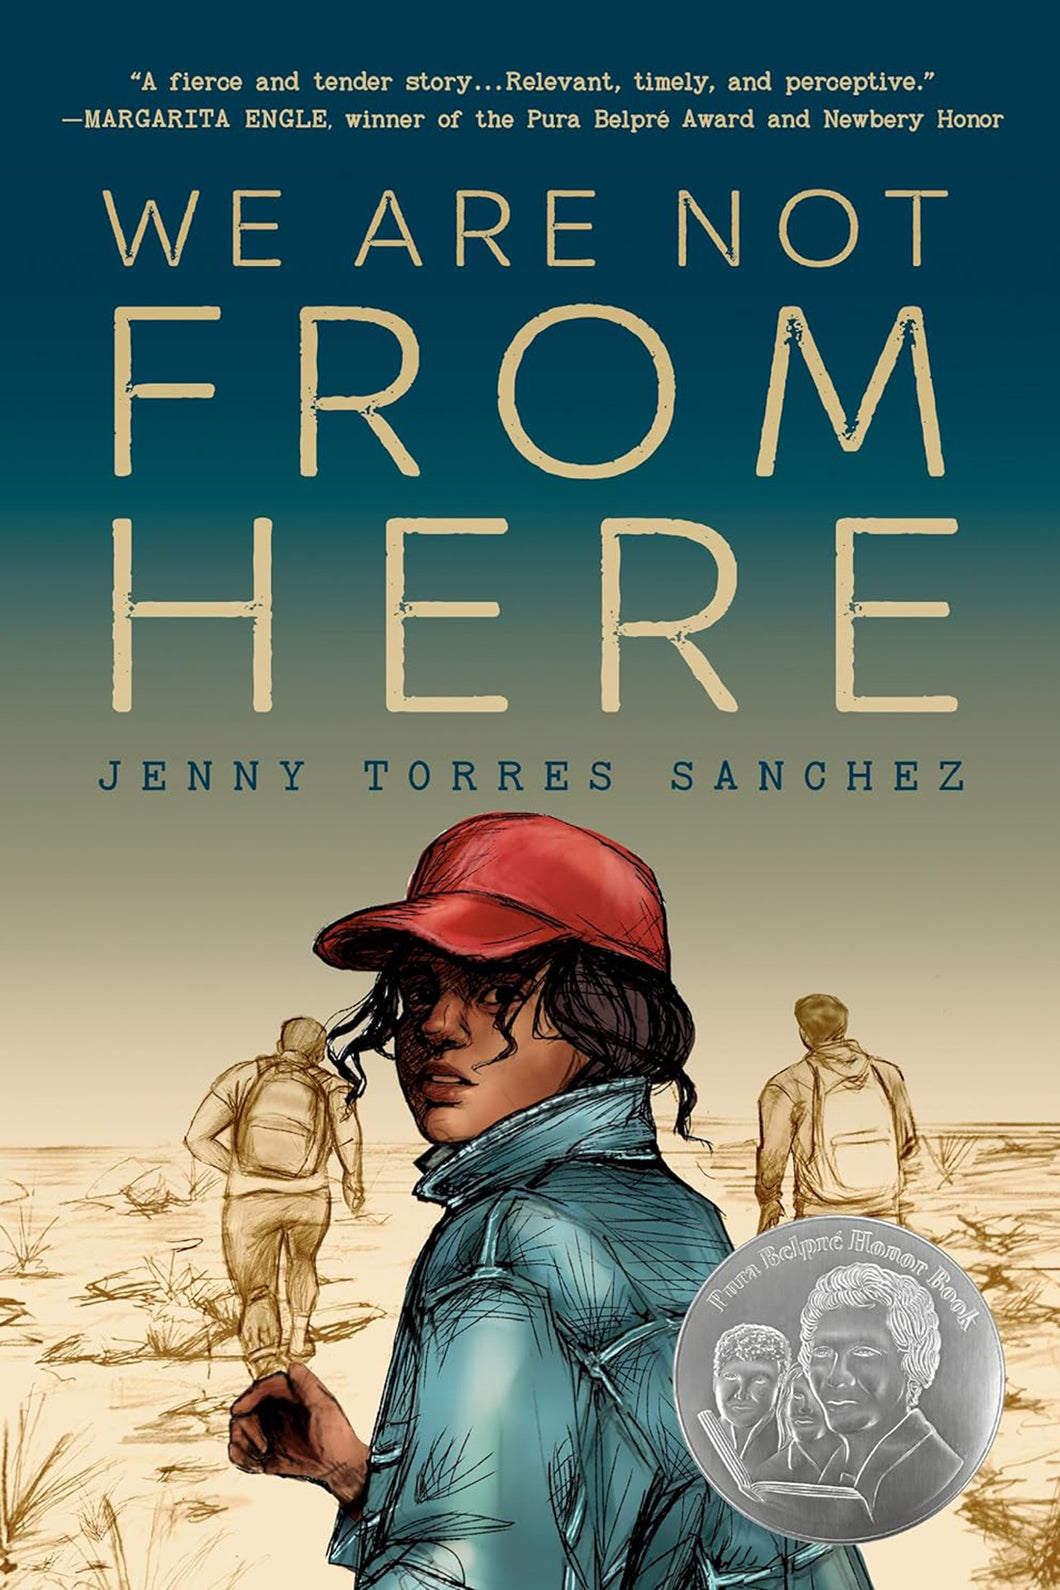 We Are Not From Here by Jenny Torres Sanchez / Hardcover or Paperback - NEW BOOK